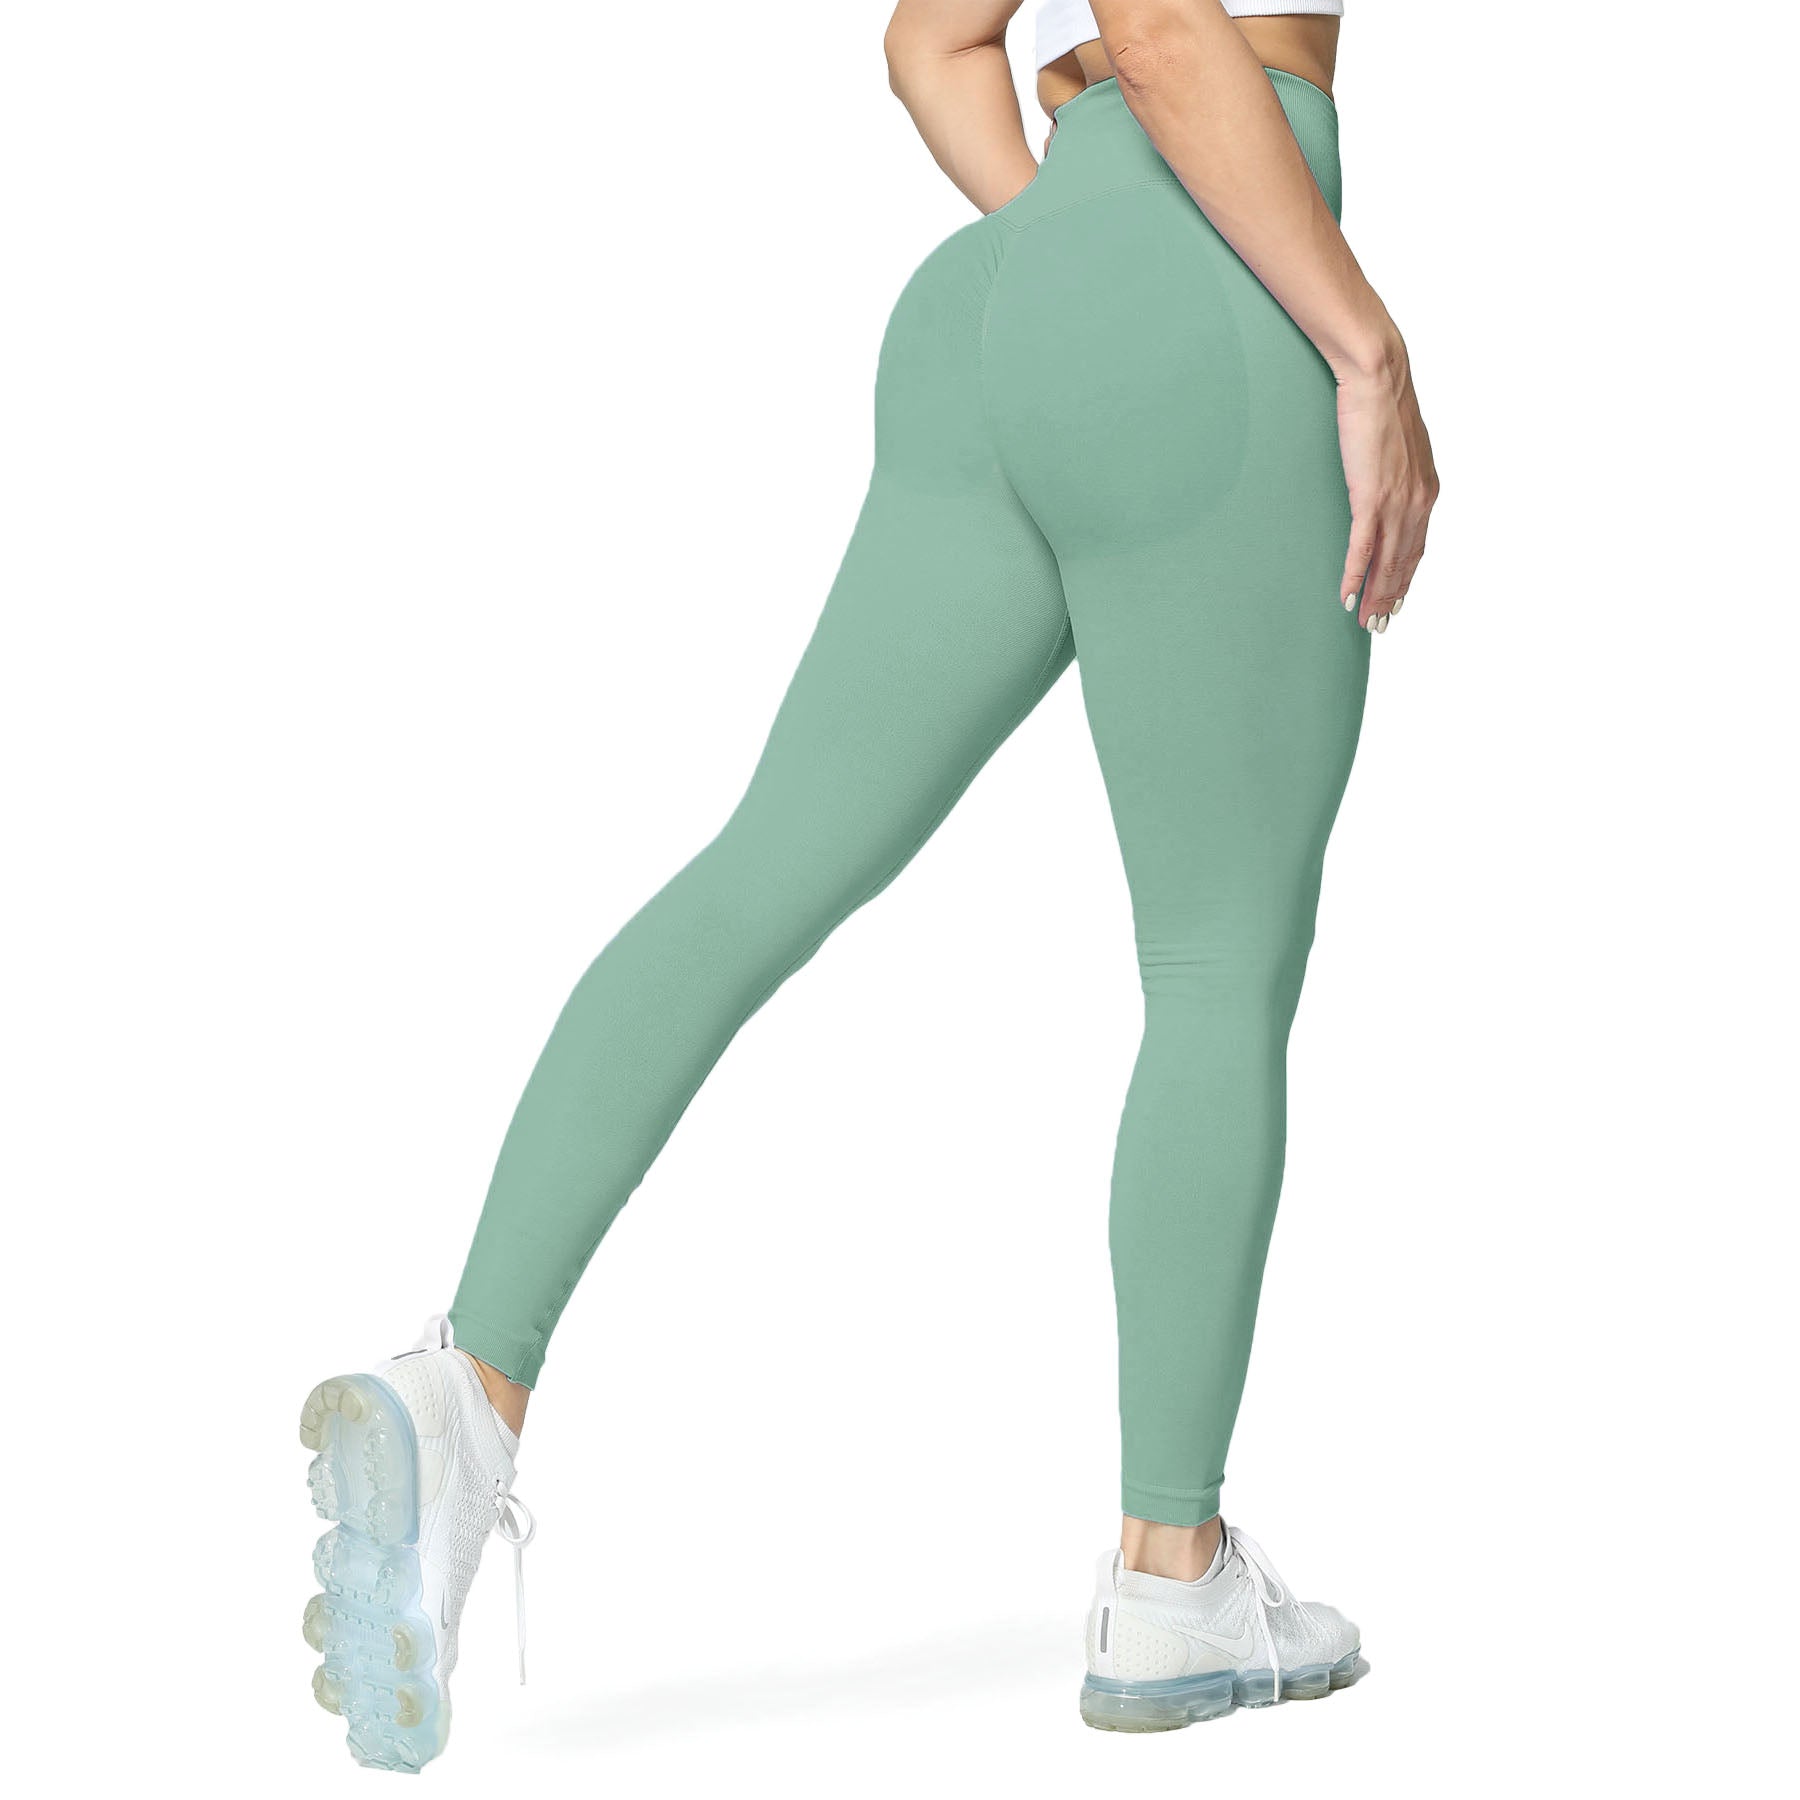 Aoxjox Seamless Scrunch Legging For Women Asset Tummy Control Workout Gym  Fitness Sport Active Yoga Pants (Ponderosa Green Marl